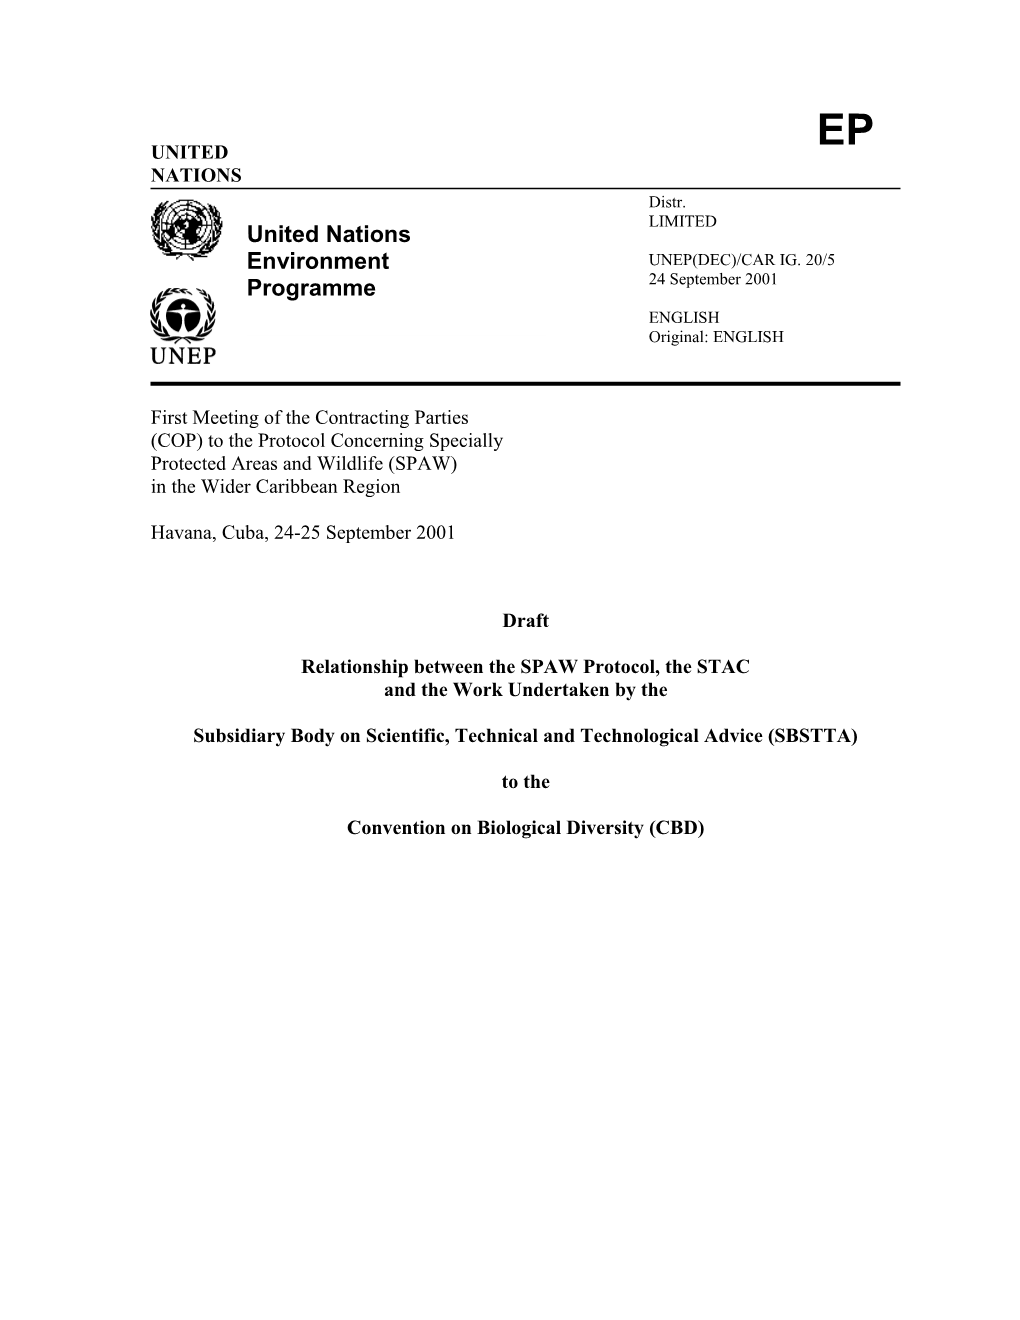 United Nations Environment Programme s2